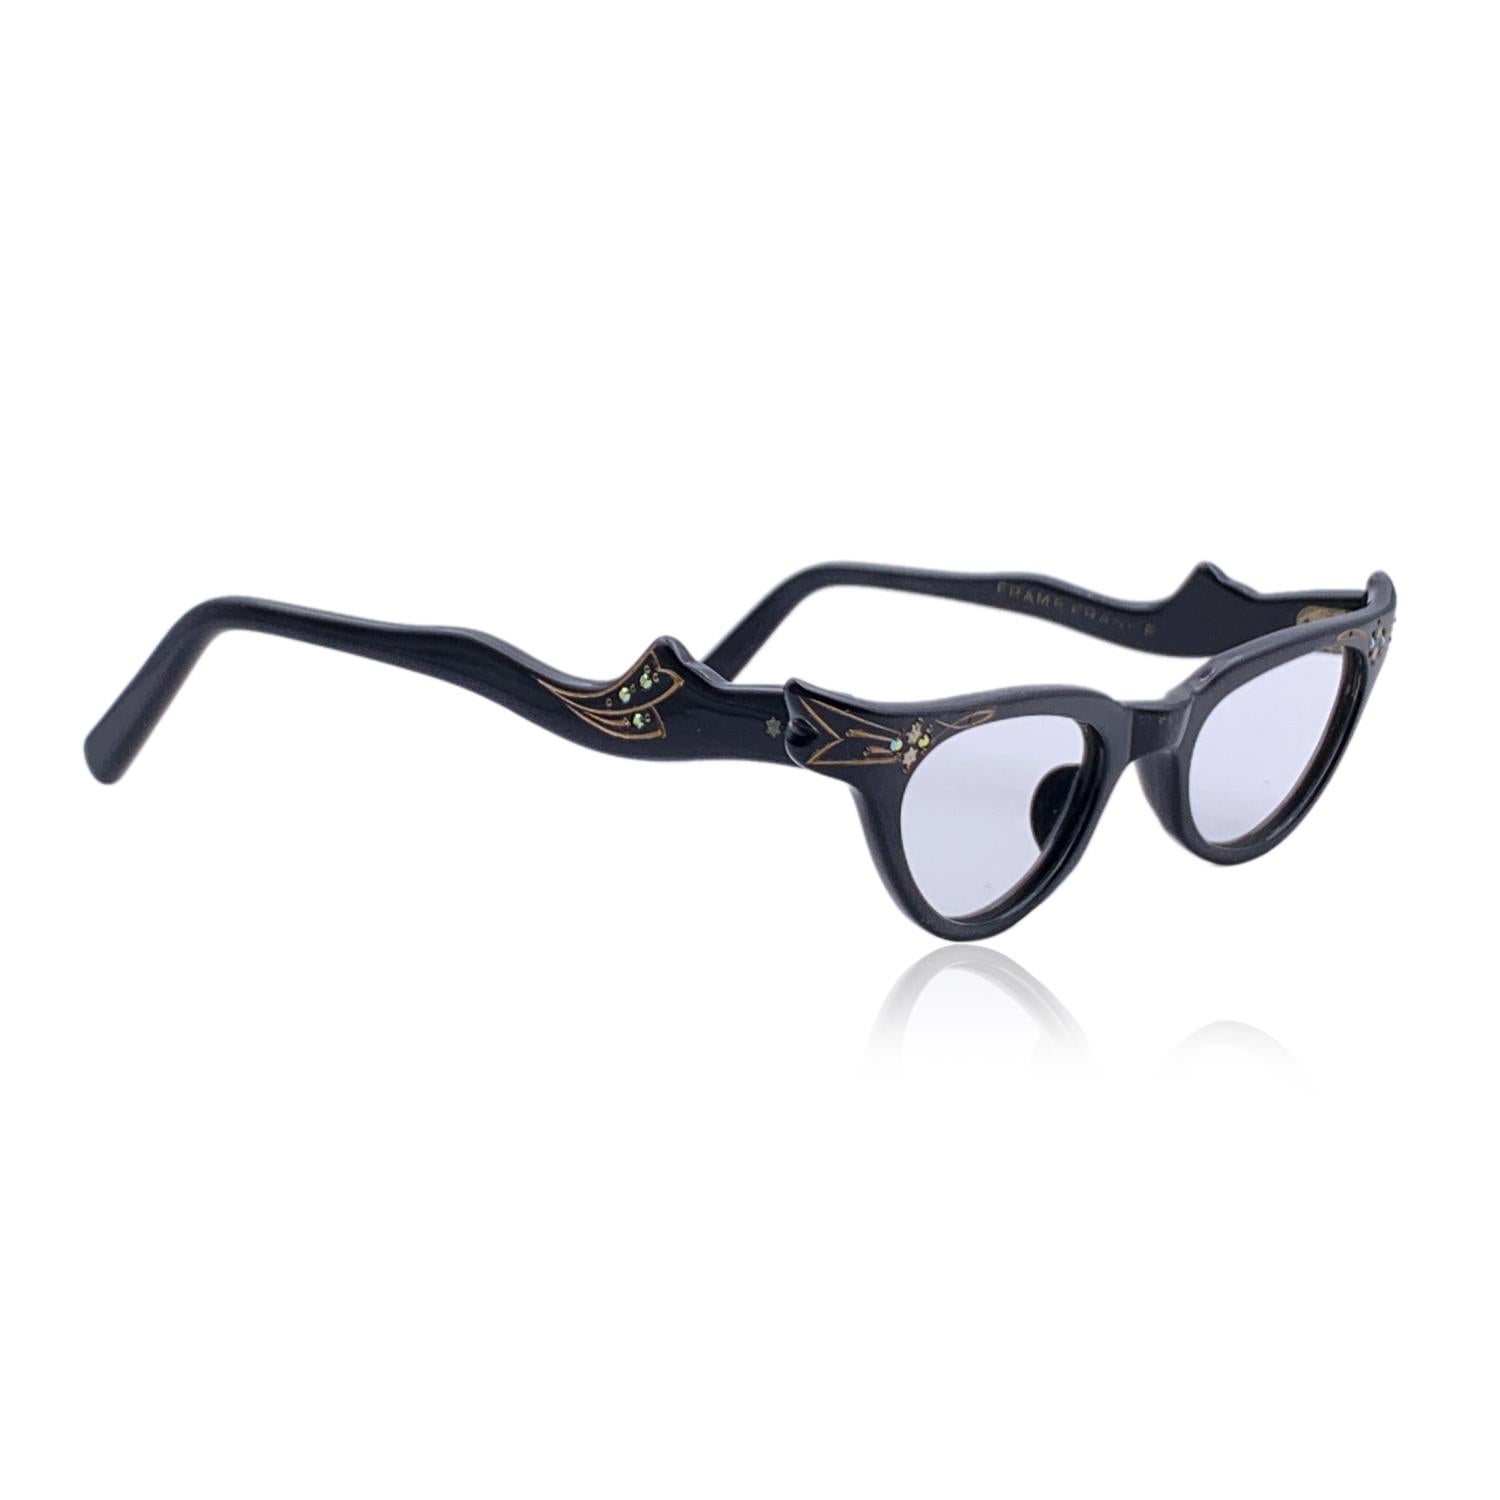 Unique vintage cat-eye frame, timeless and classy. Made with an acetate black based frame with rhinestones and small golden studs detailing on corners. Made in France.

Details

MATERIAL: Acetate

COLOR: Black

MODEL: -

GENDER: Women

COUNTRY OF